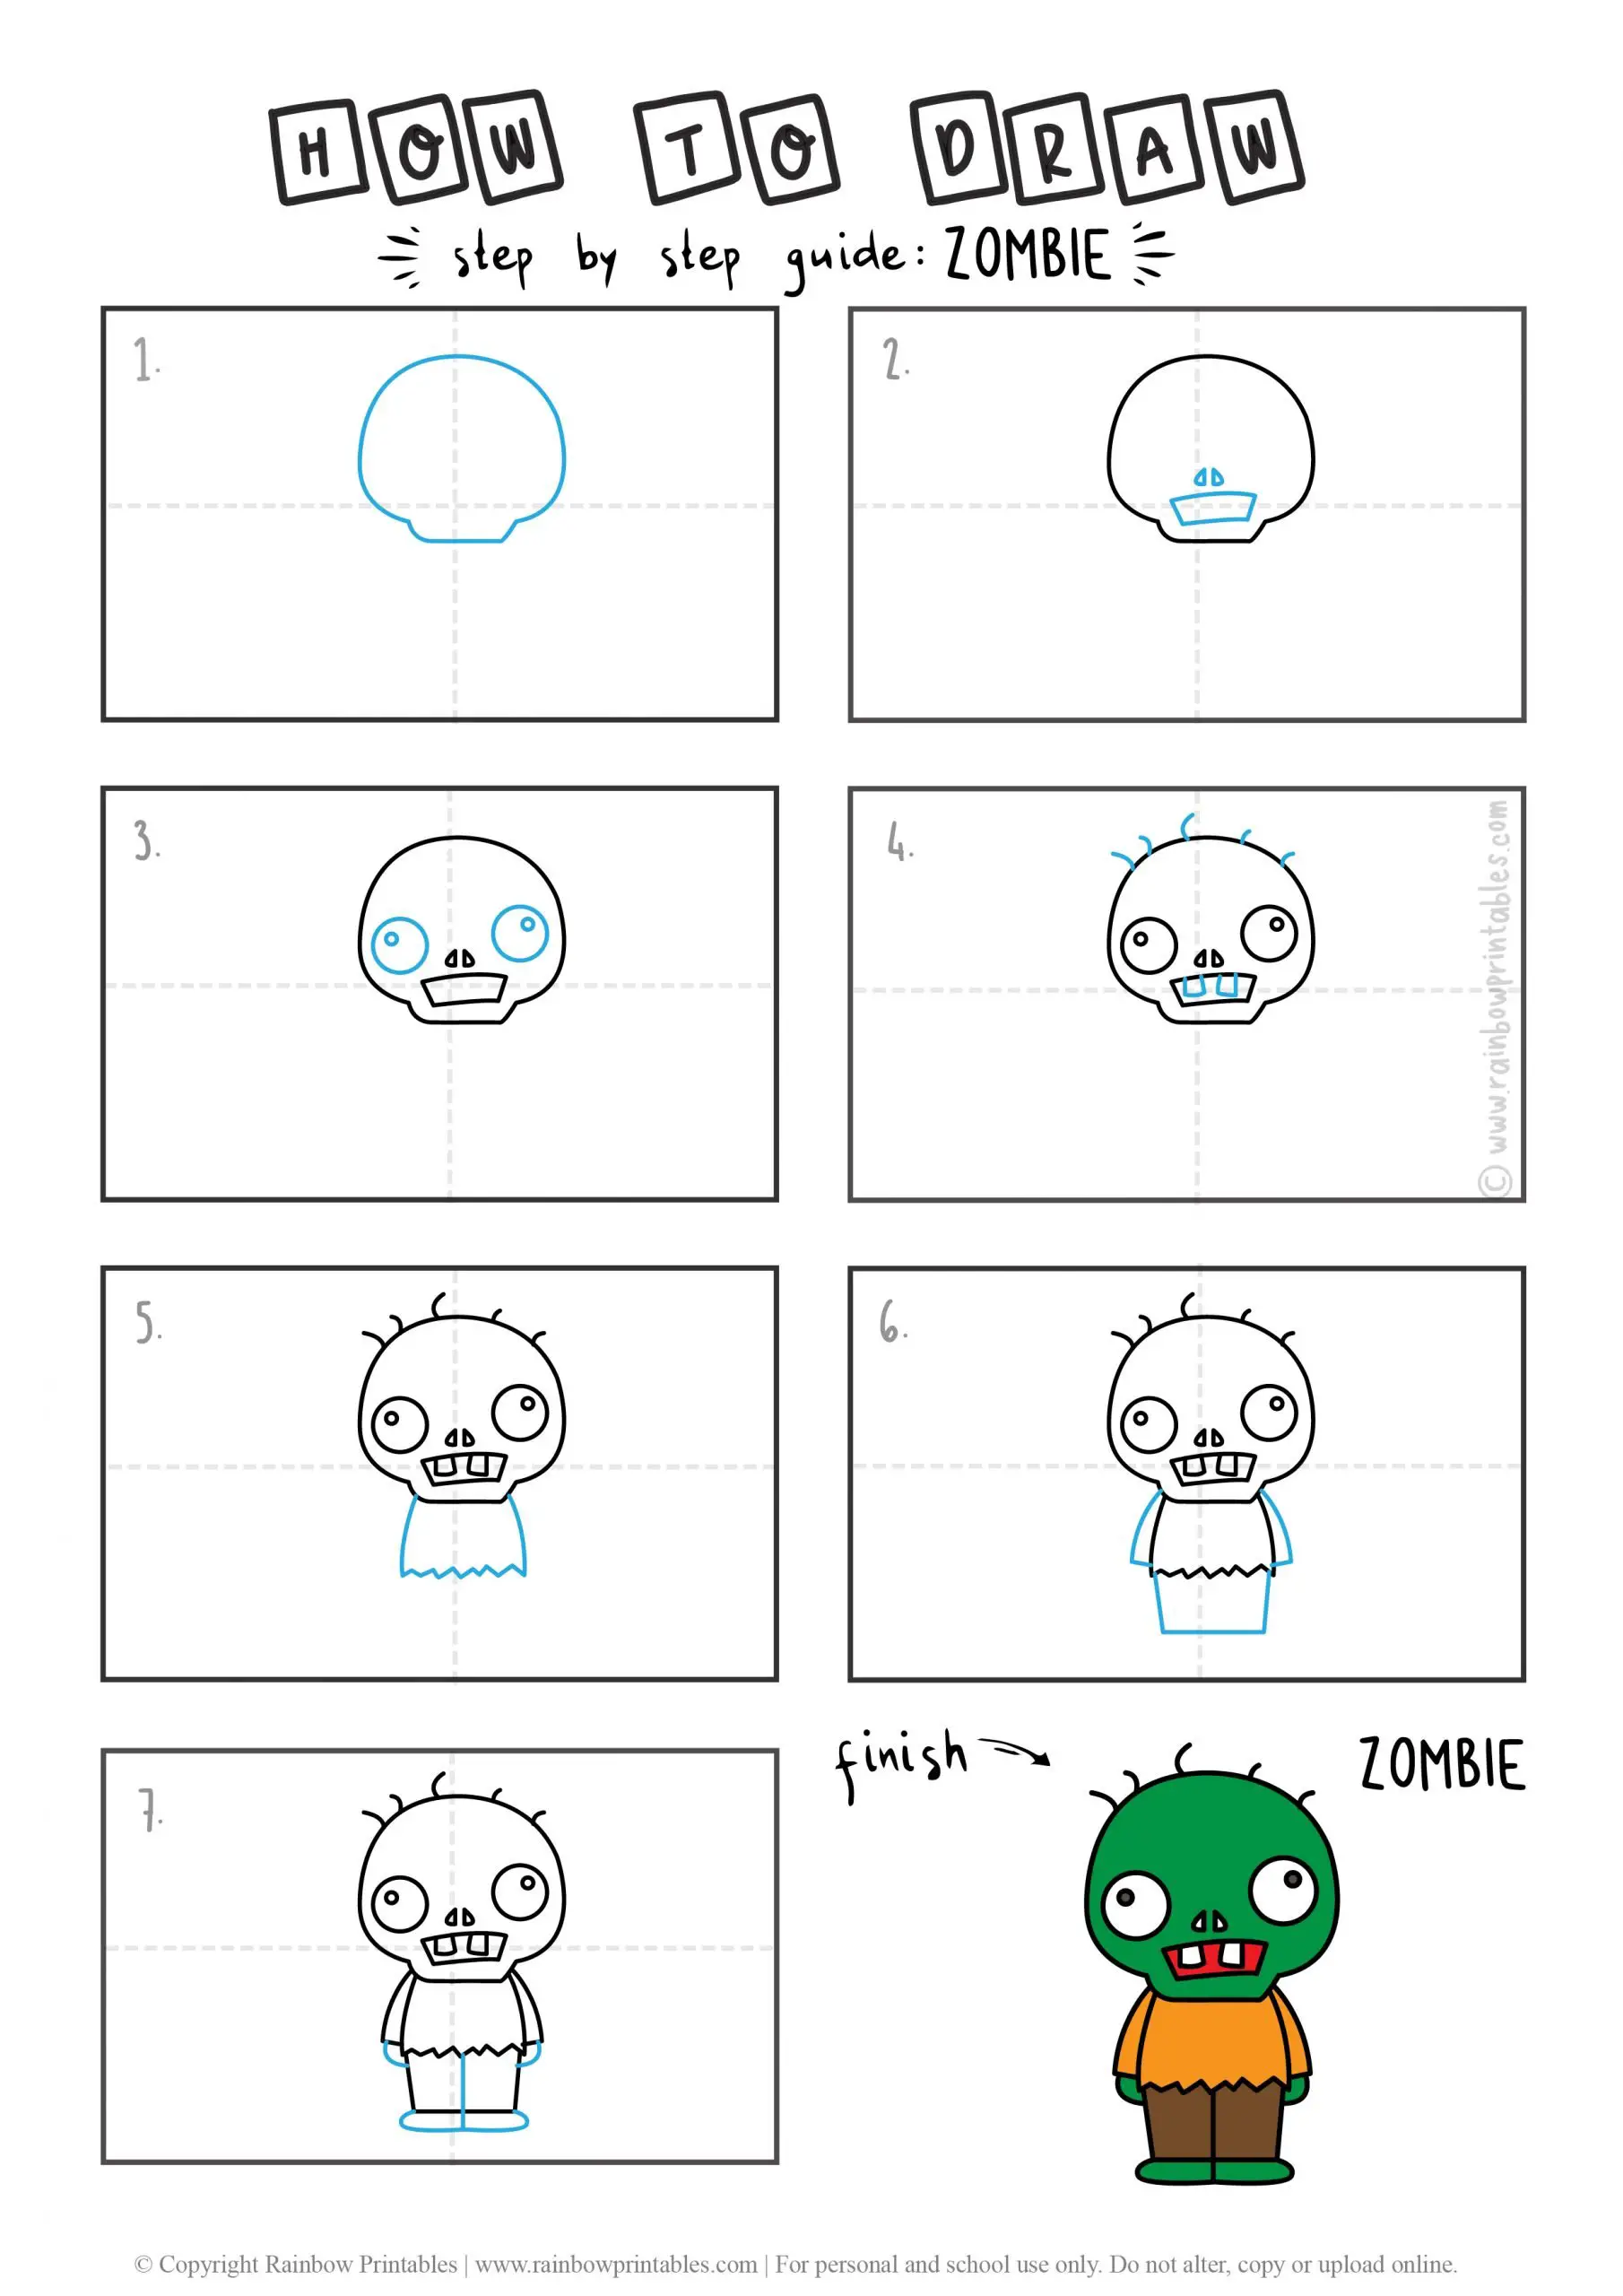 HOW TO DRAW A ZOMBIE UNDEAD HALLOWEEN MONSTER CUTE CARTOON GUIDE ILLUSTRATION STEP BY STEP EASY SIMPLE FOR KIDS